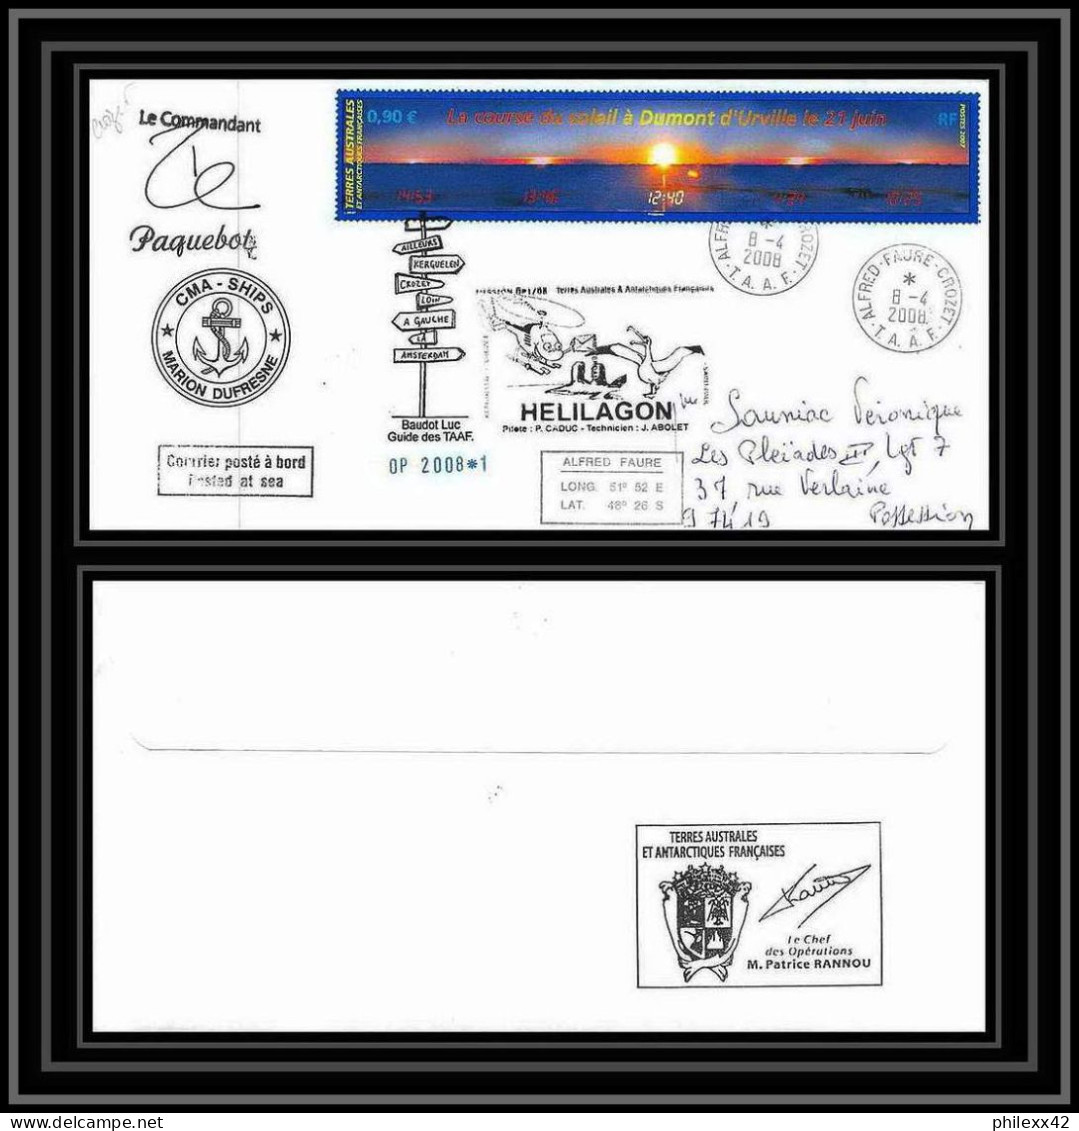 2779 Helilagon Terres Australes TAAF Lettre Cover Dufresne 2 Signé Signed Op 2008/1 Crozet N°477 8/4/2008 - Helicopters